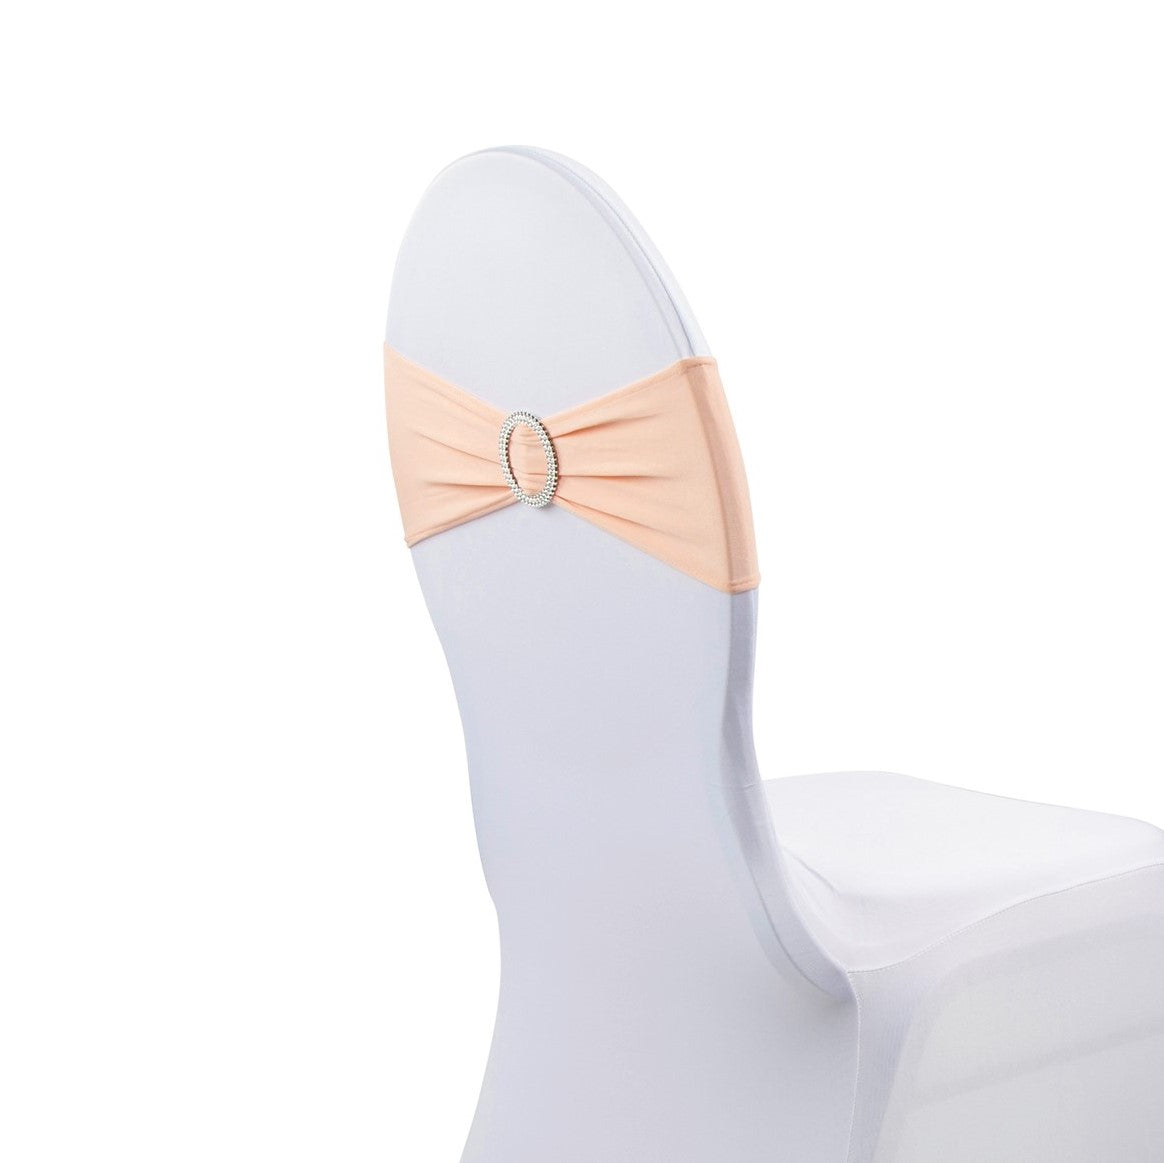 Buckle Spandex Stretch Chair Band - Blush/Rose Gold